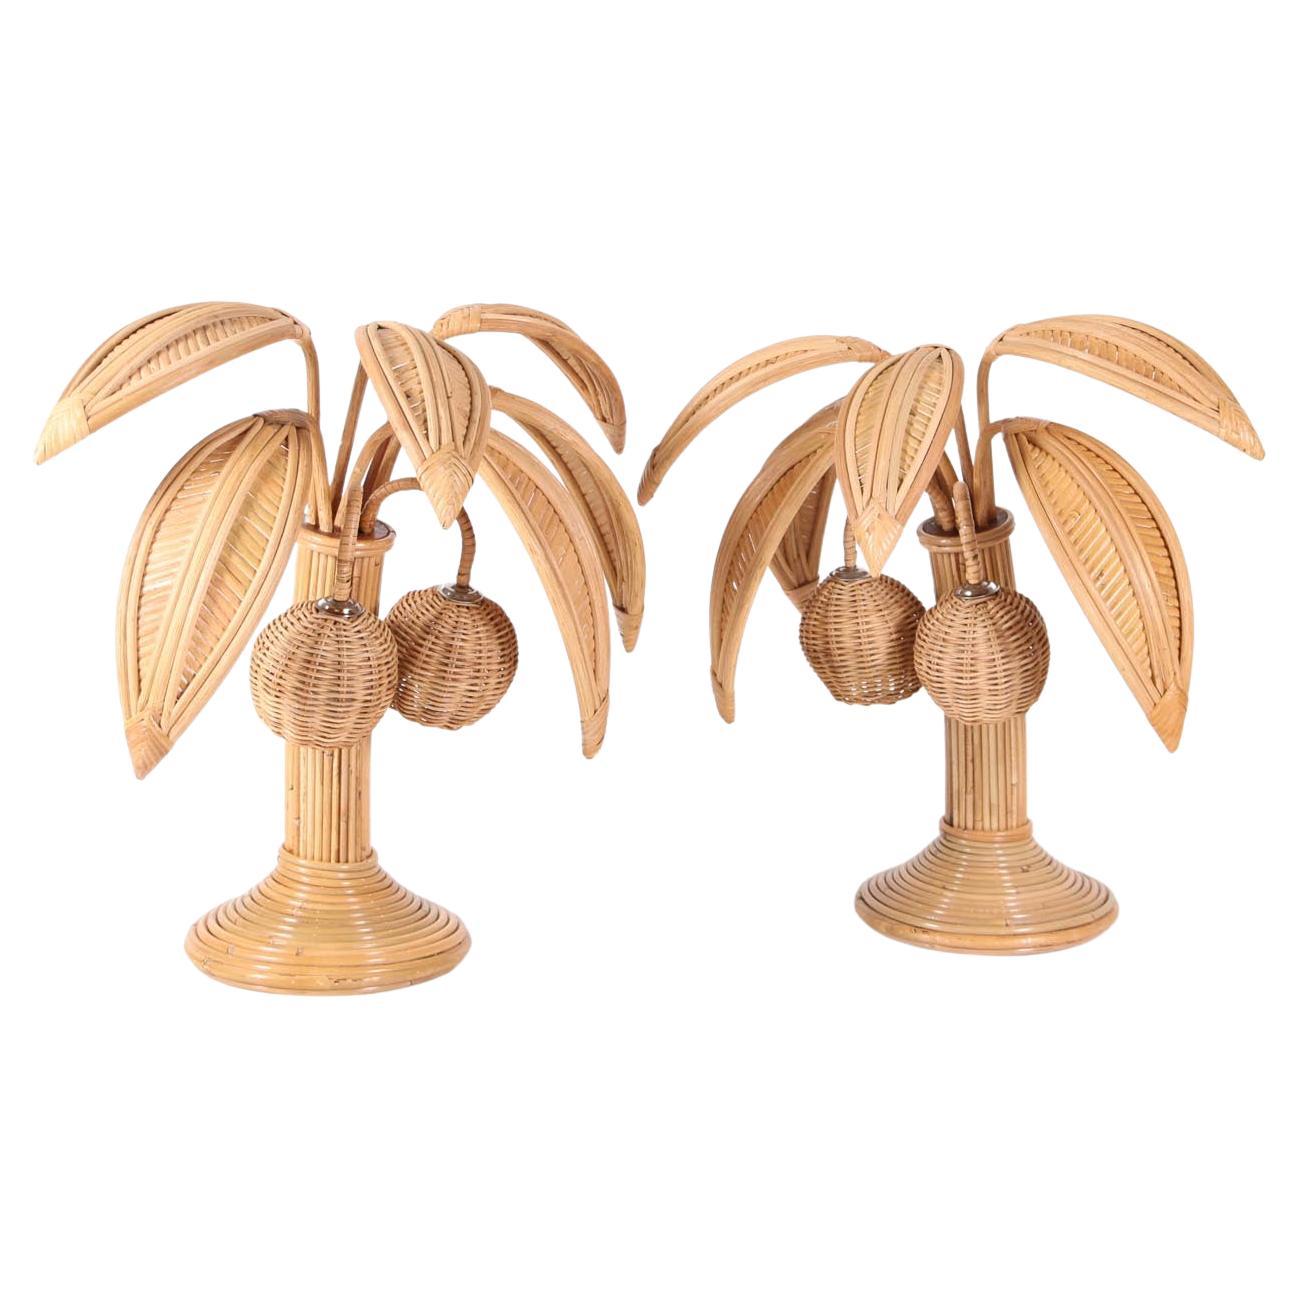 Pair of rattan coconut tree - palm tree lamps